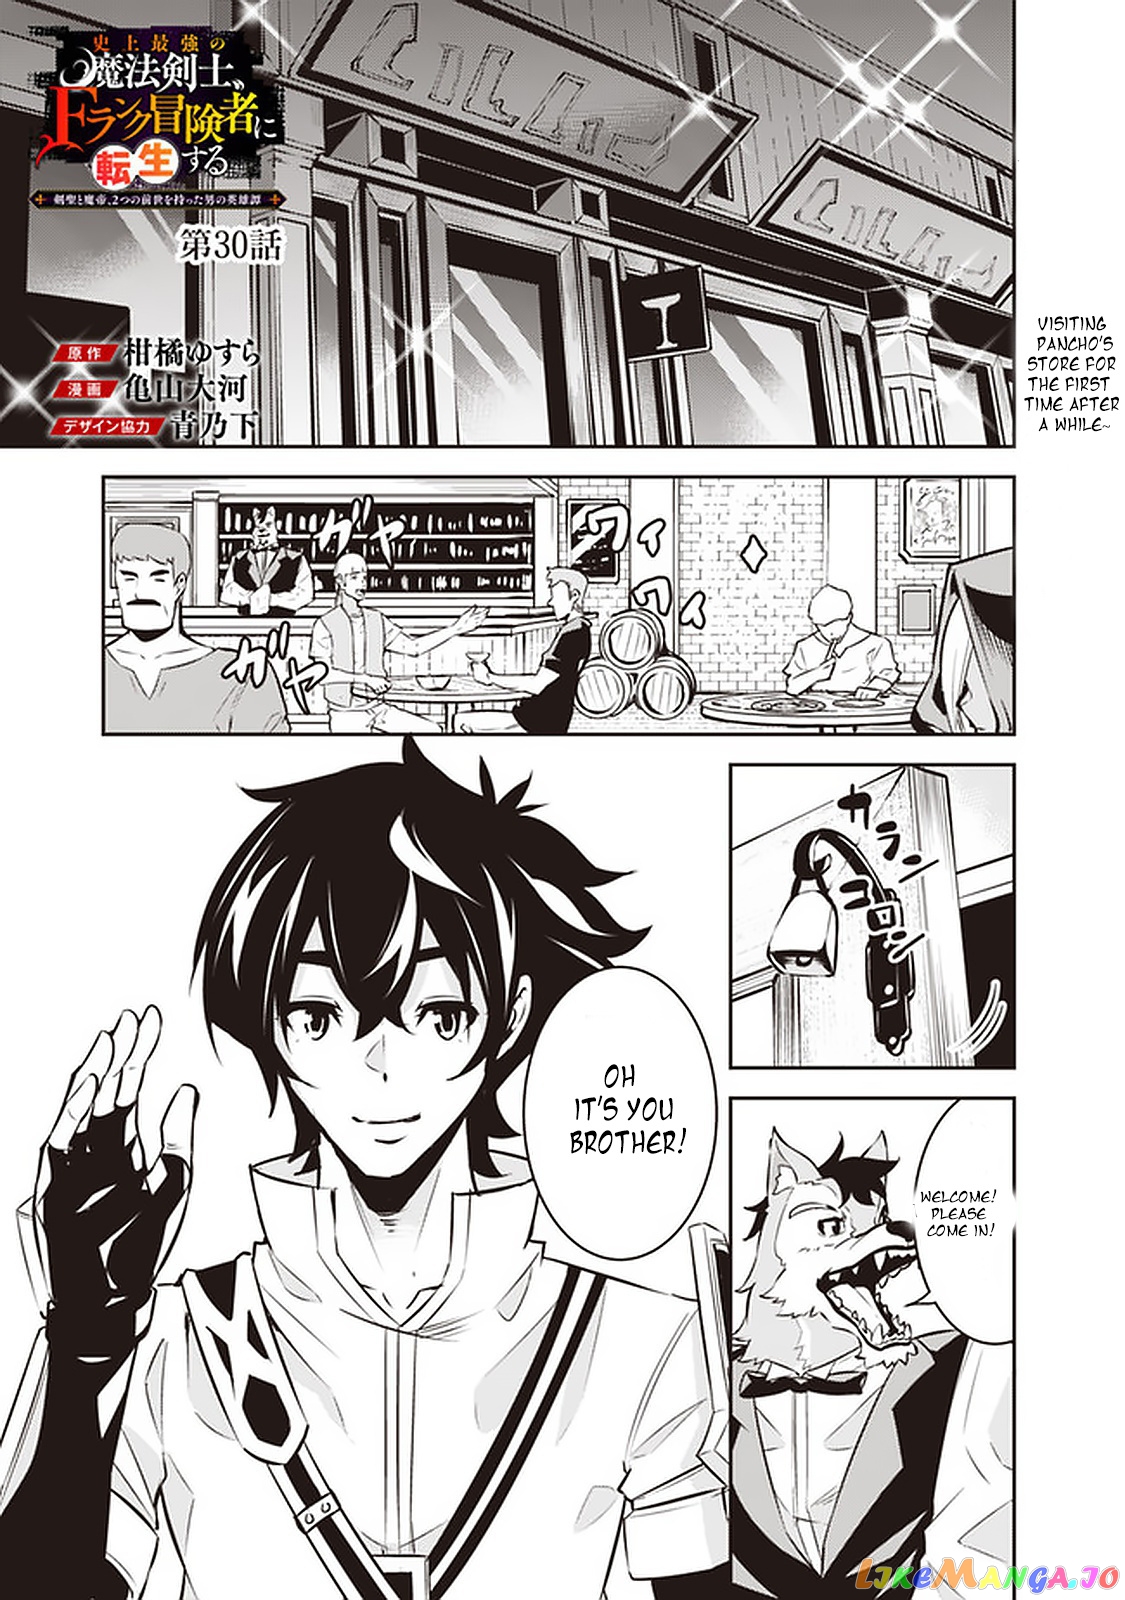 The Strongest Magical Swordsman Ever Reborn As An F-Rank Adventurer. chapter 30 - page 2